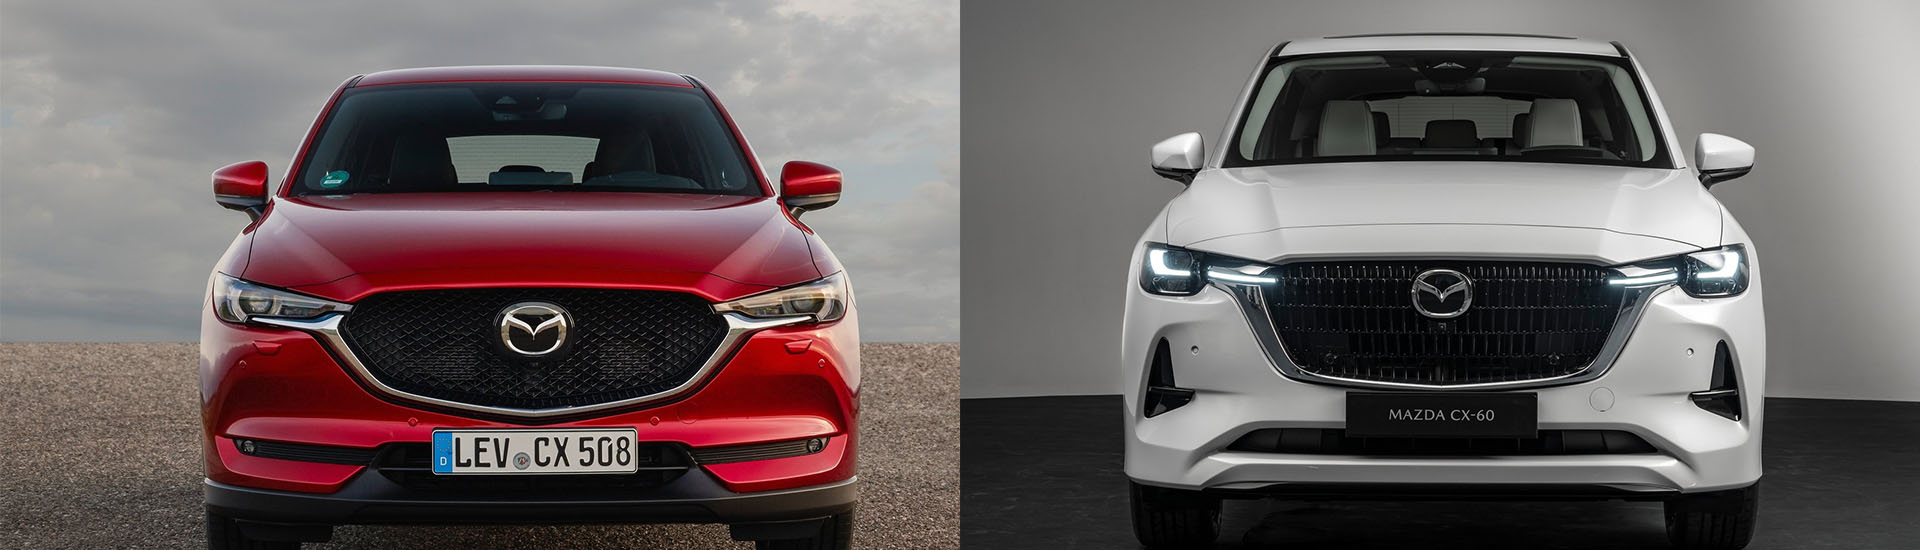 Mazda CX-5 vs CX-60: what's the difference between the two midsize SUVs? -  Chasing Cars